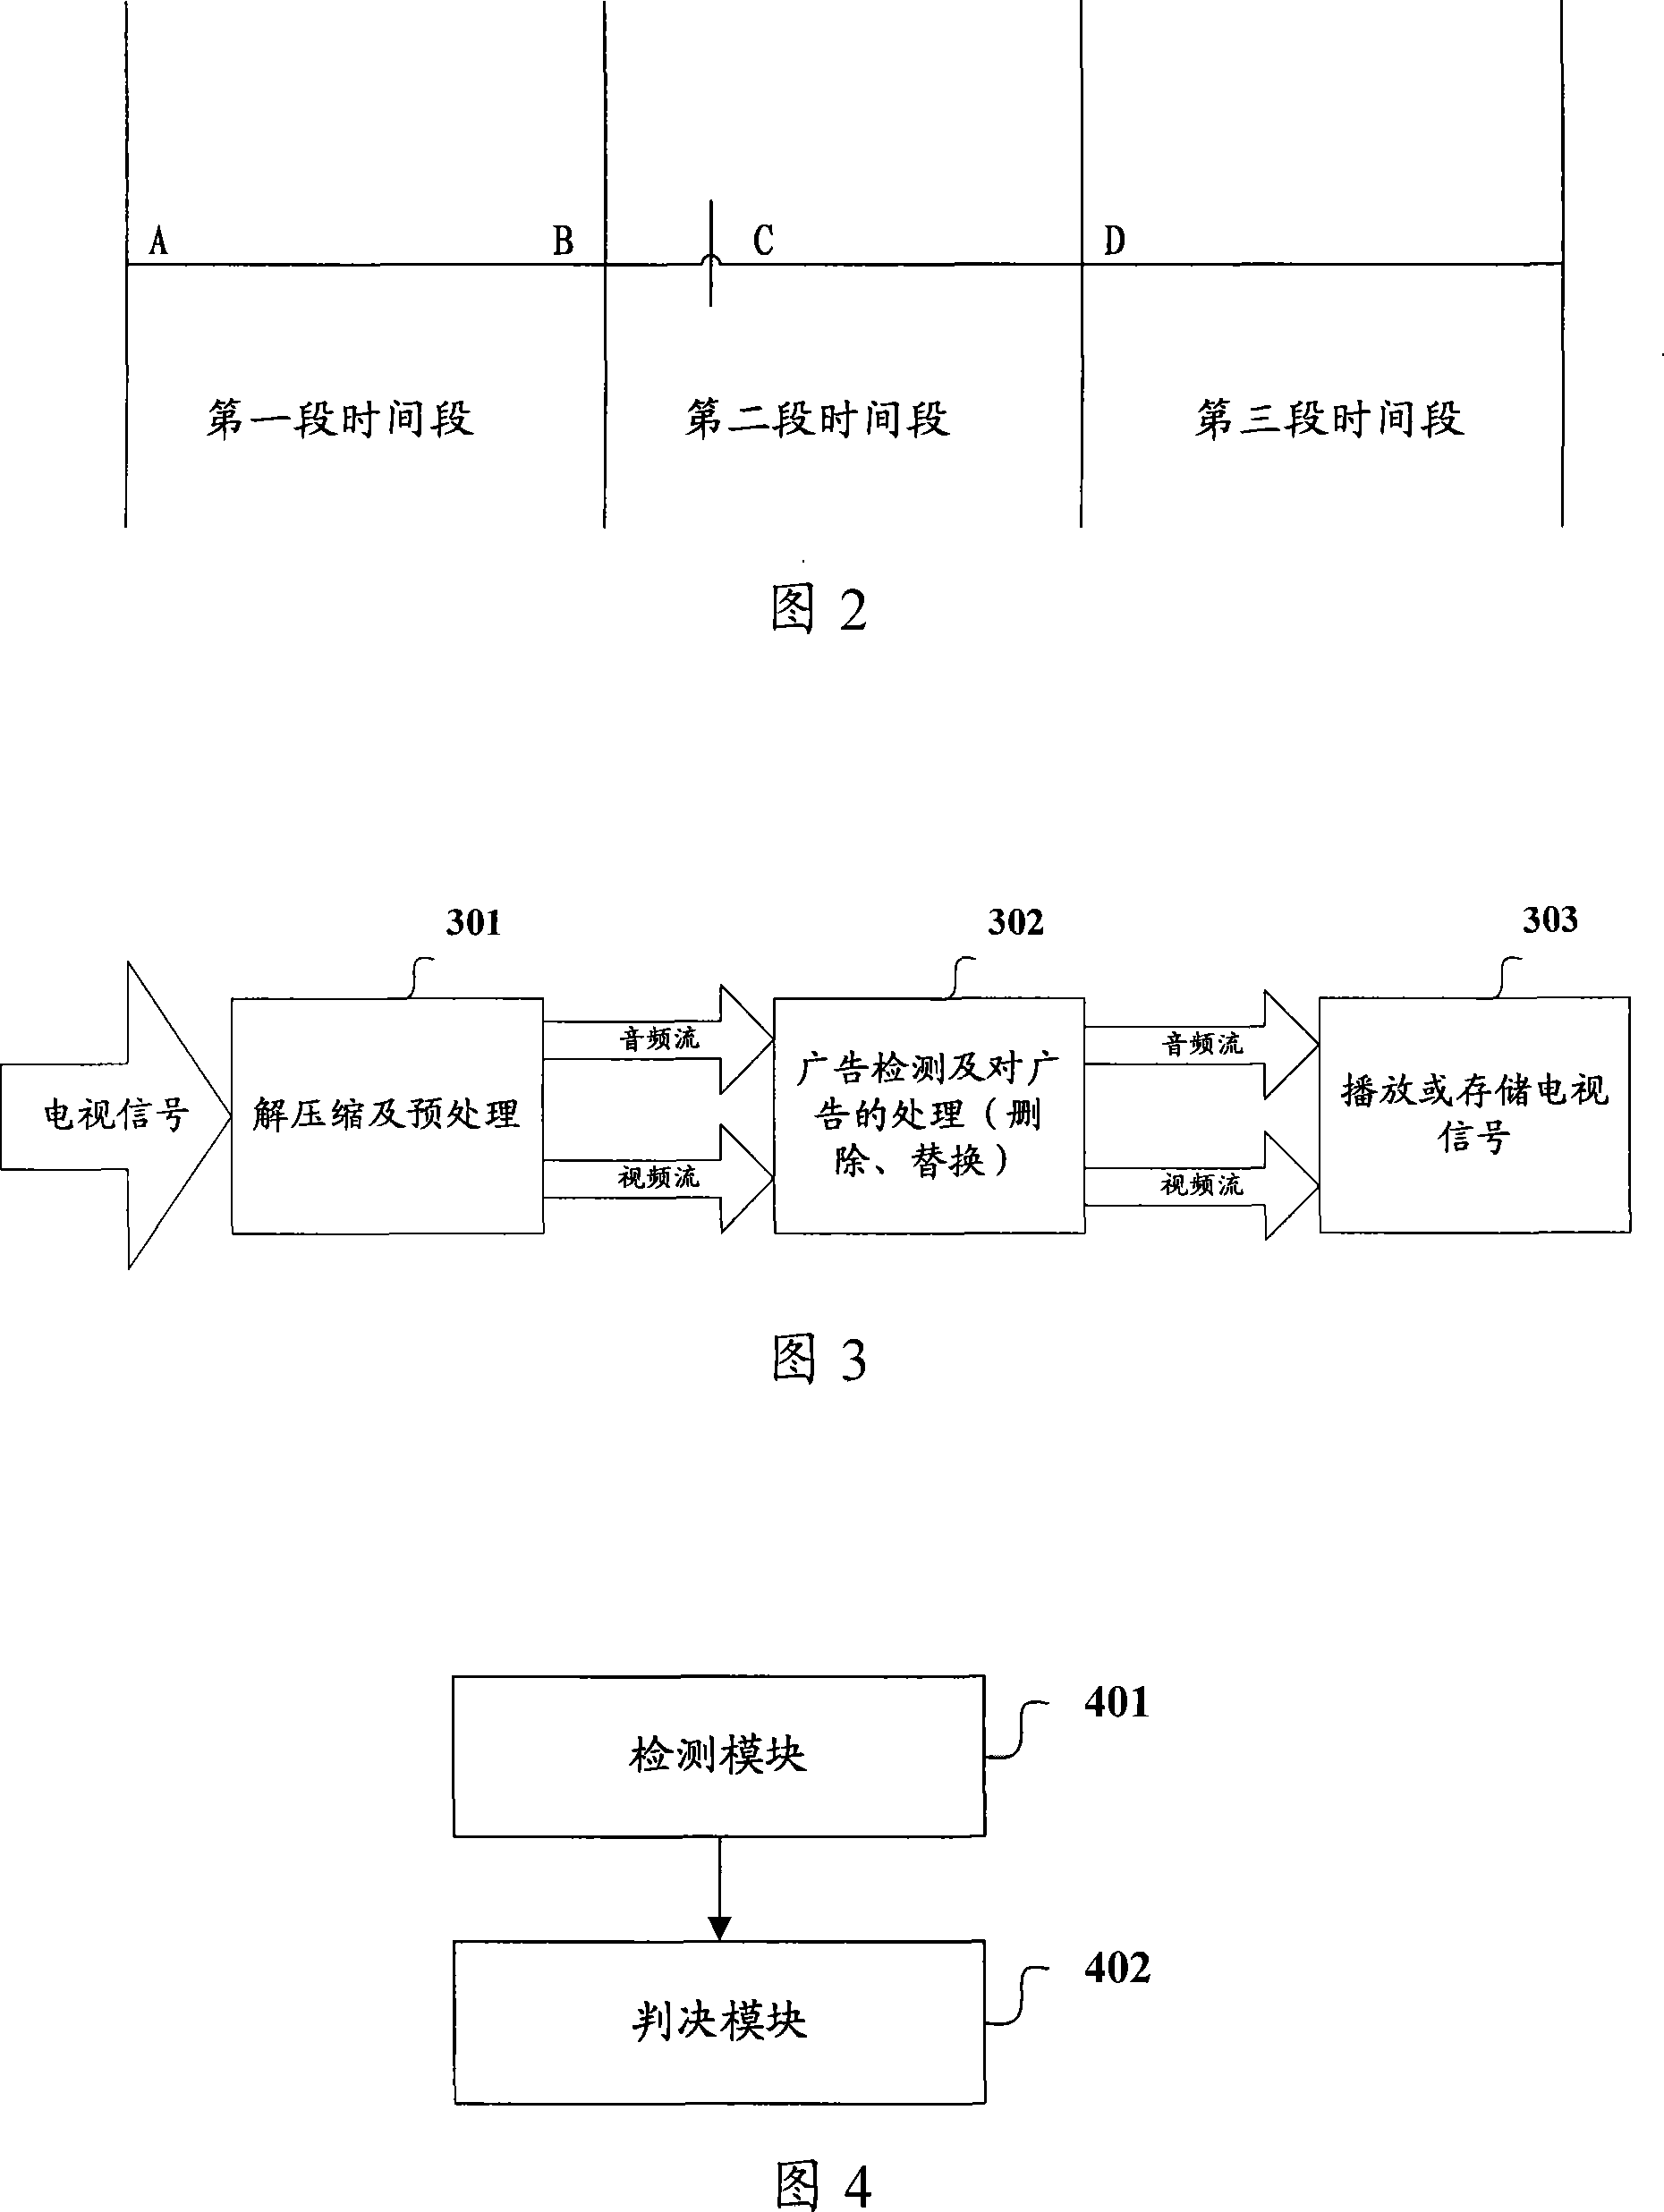 Method and apparatus for real-time detecting advertisement from broadcast data stream